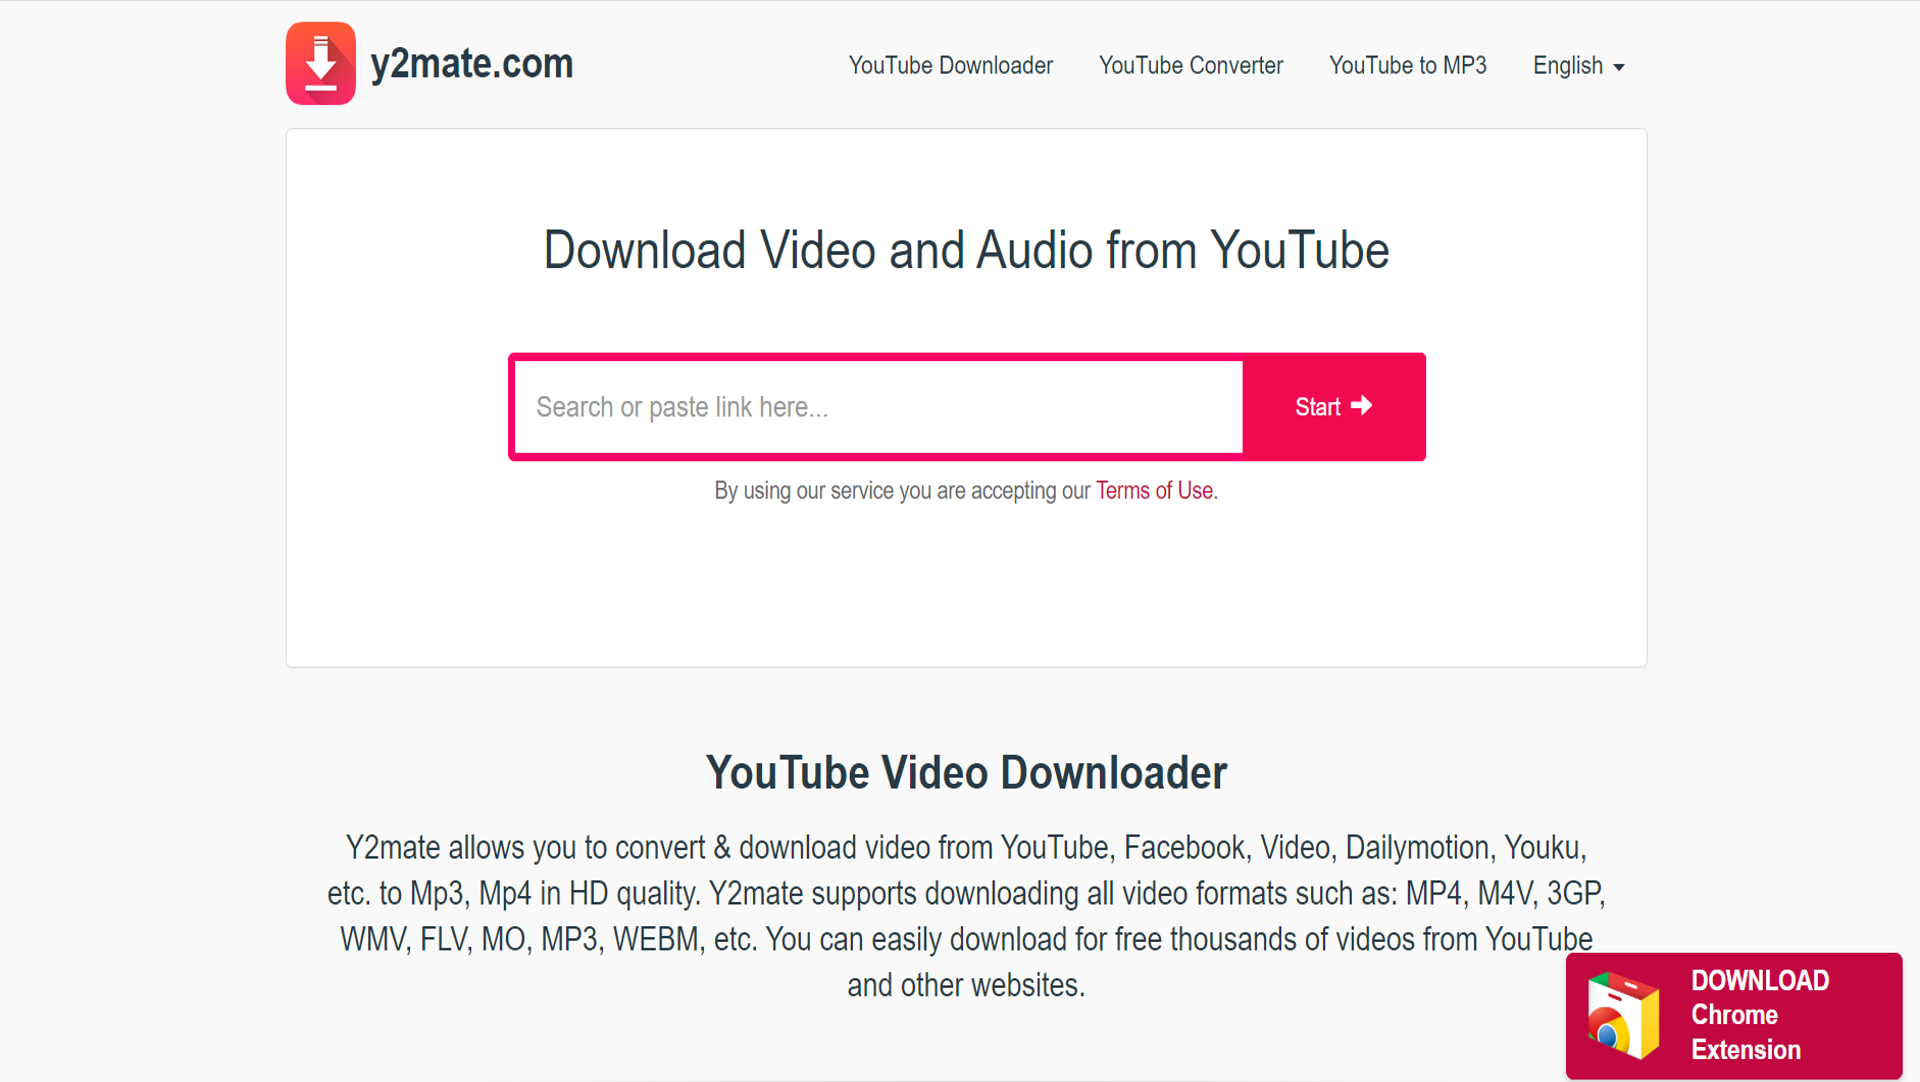 Easy to use YouTube MP3 converter